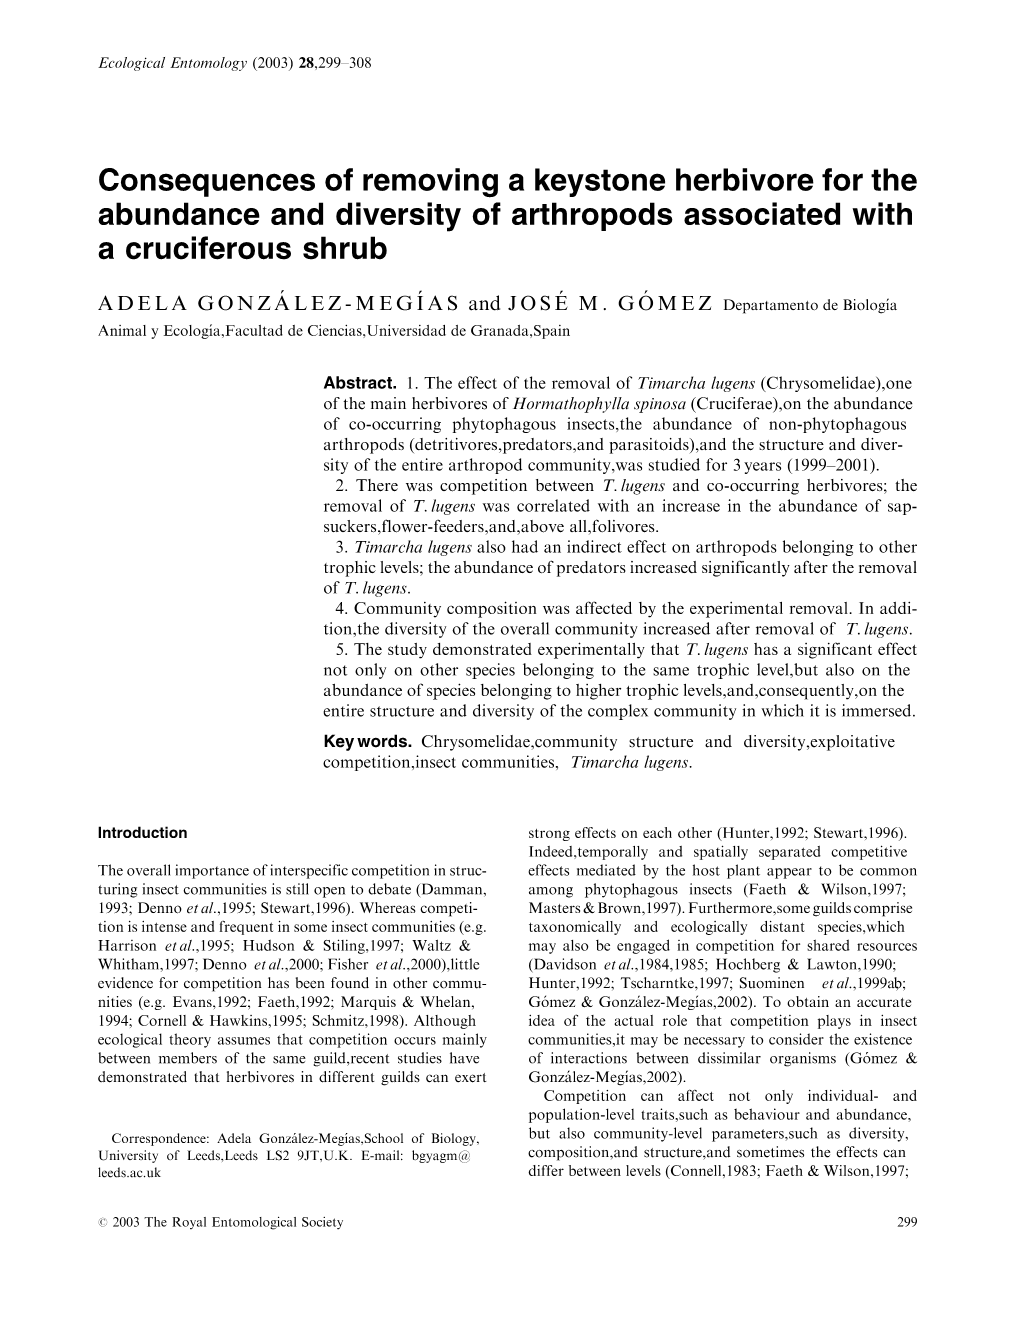 Consequences of Removing a Keystone Herbivore for the Abundance and Diversity of Arthropods Associated with a Cruciferous Shrub